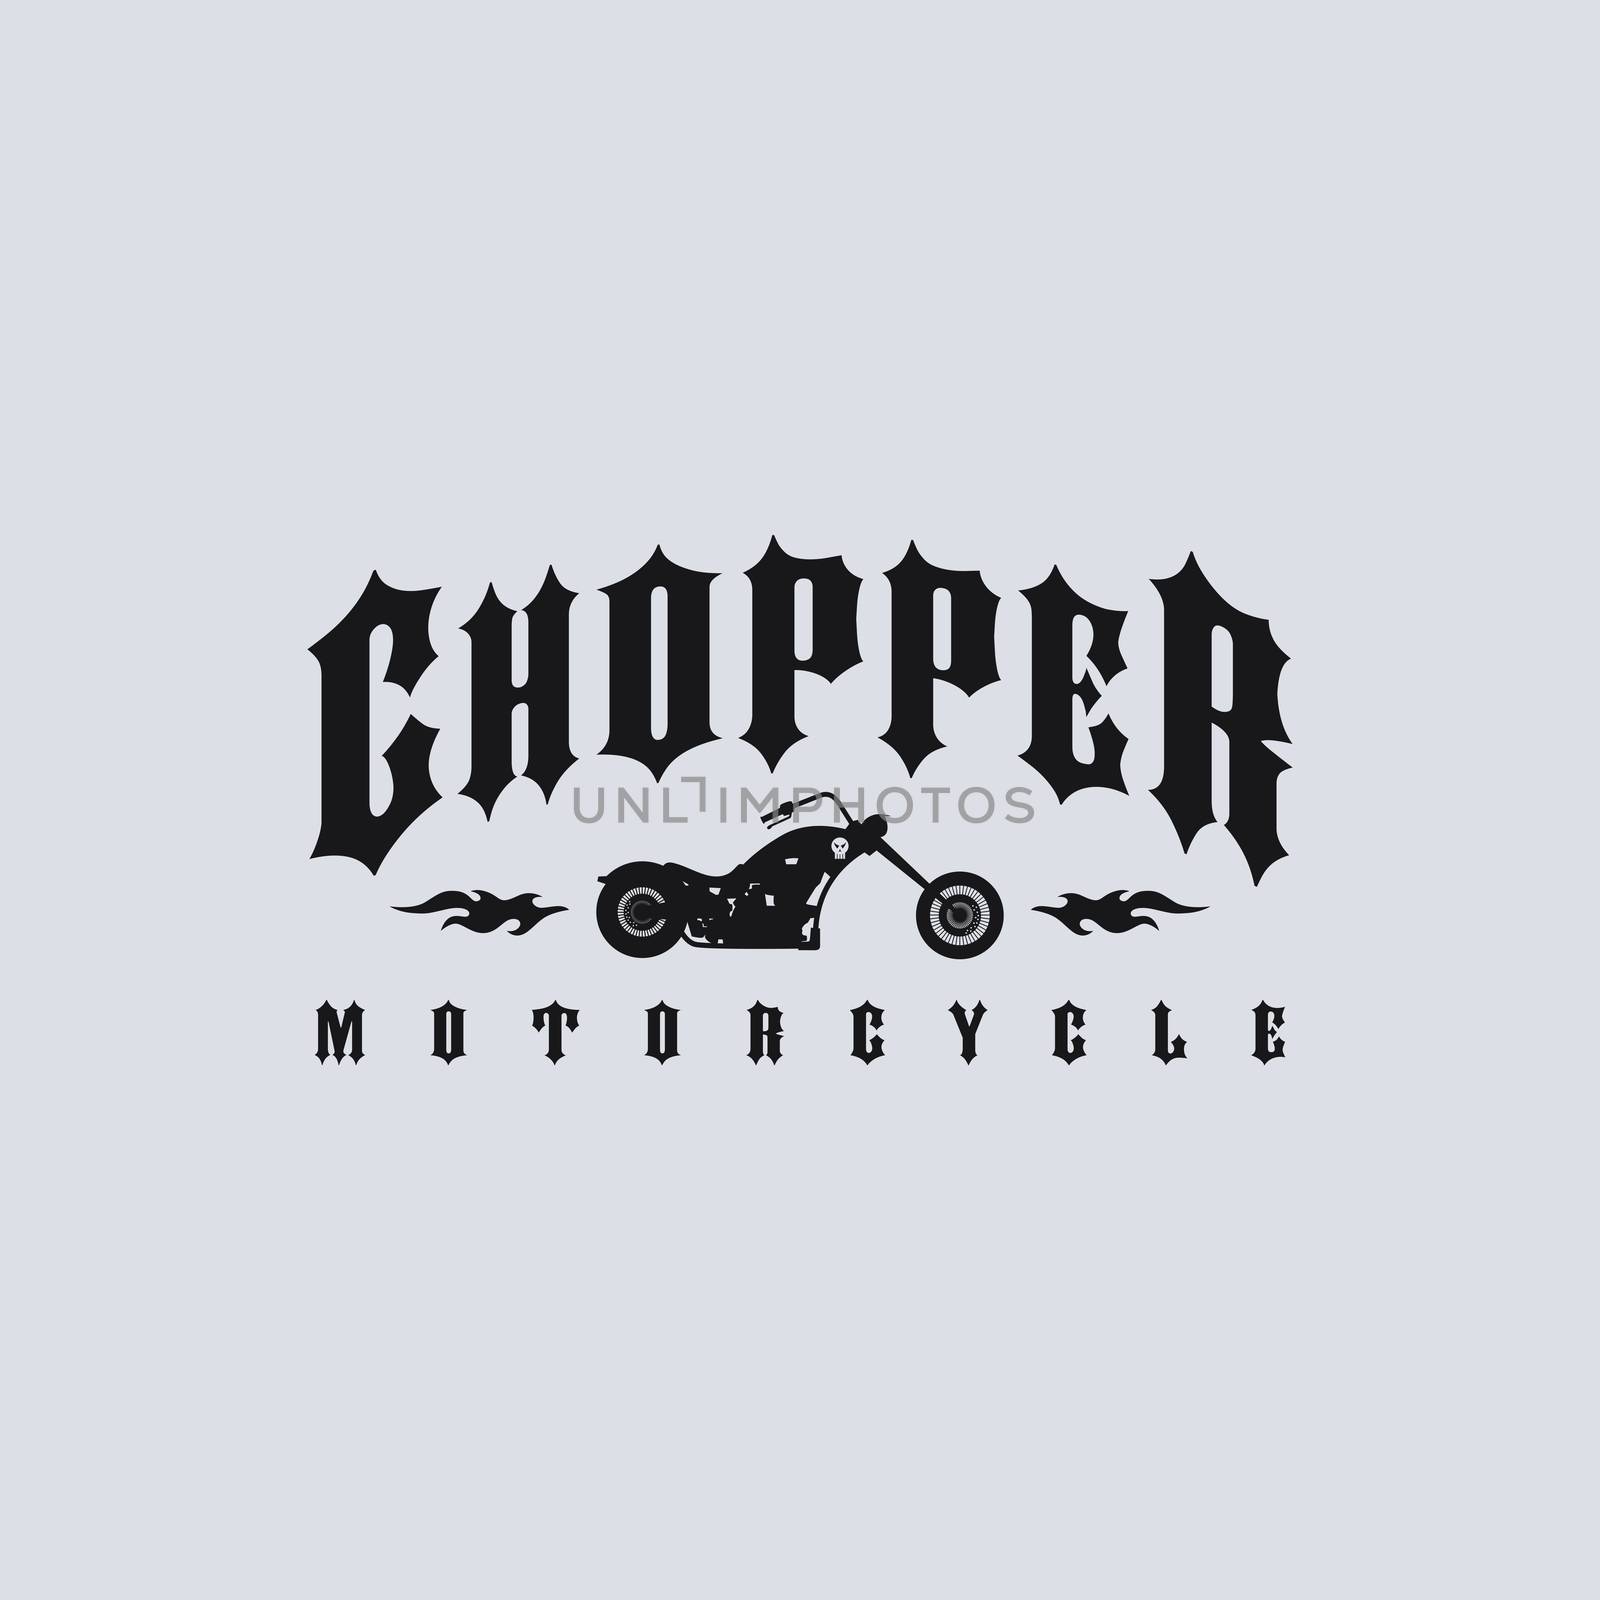 chopper motorcycle by vector1st